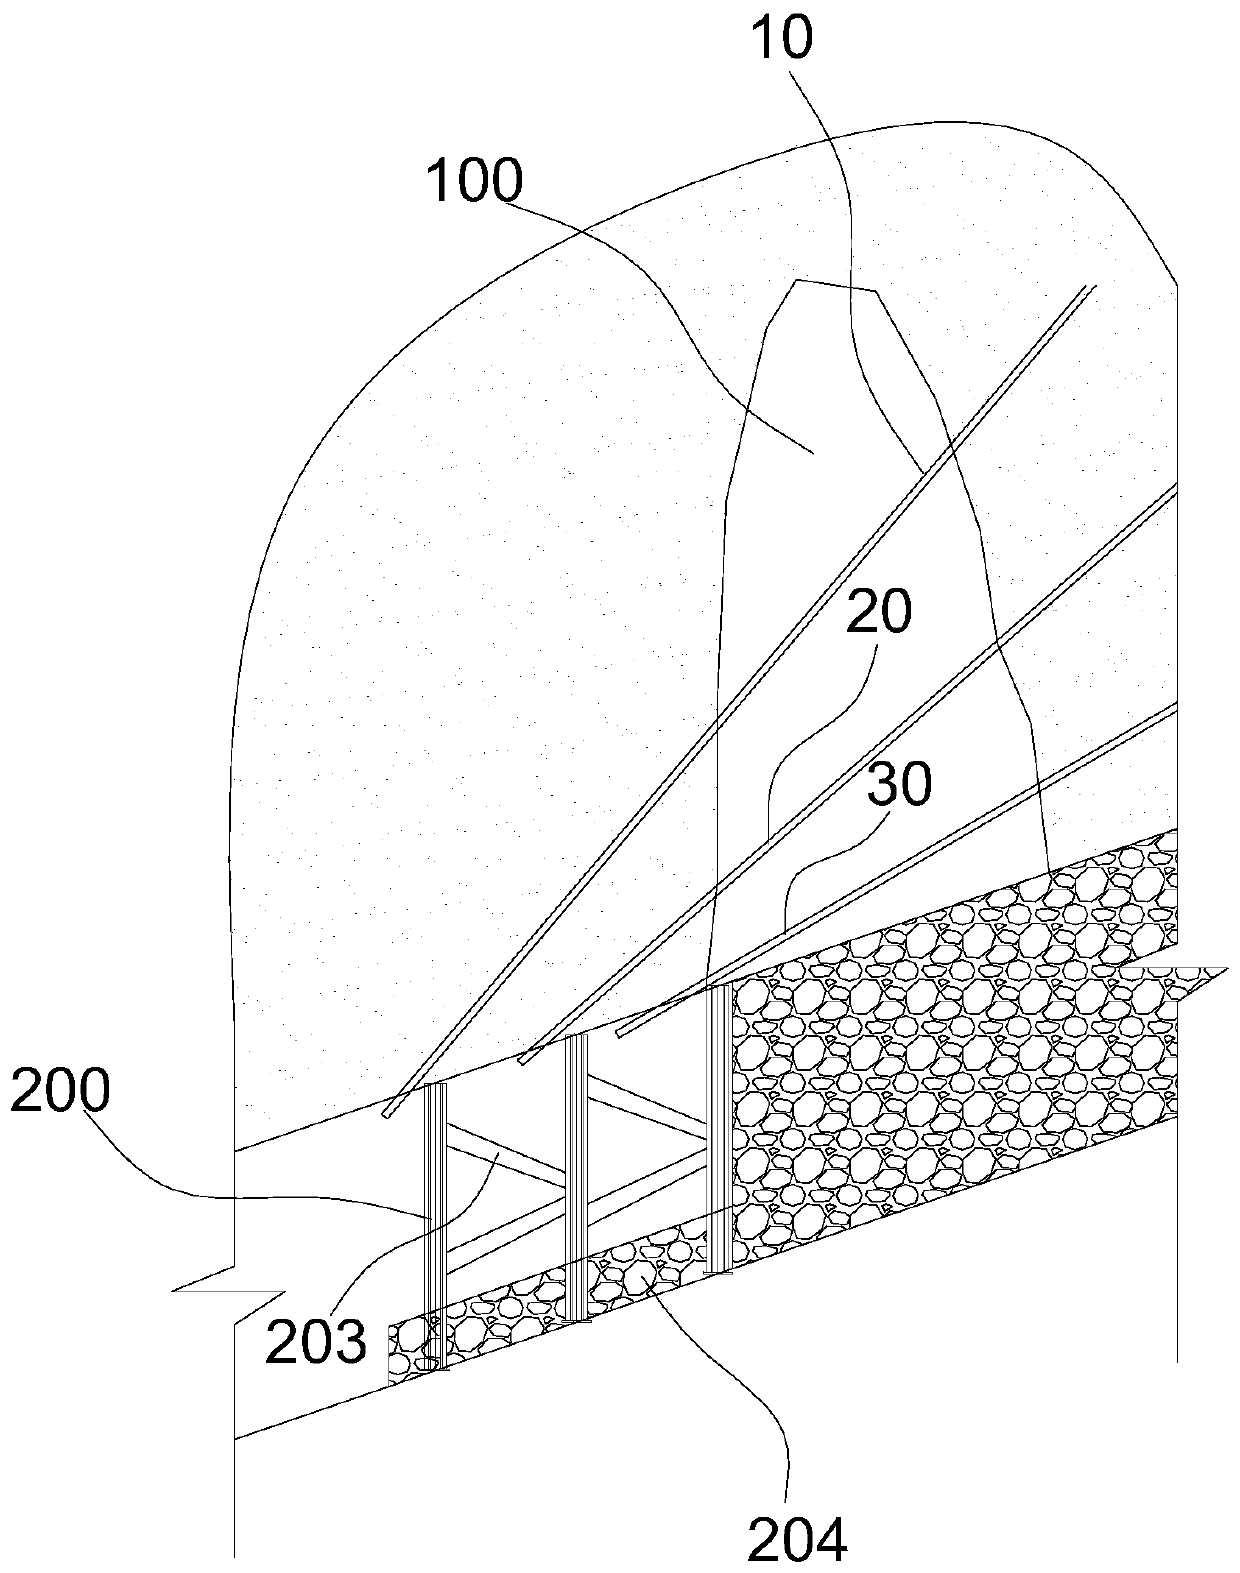 Treatment construction method for continuous collapse and roof fall in small-section steep slope tunnel